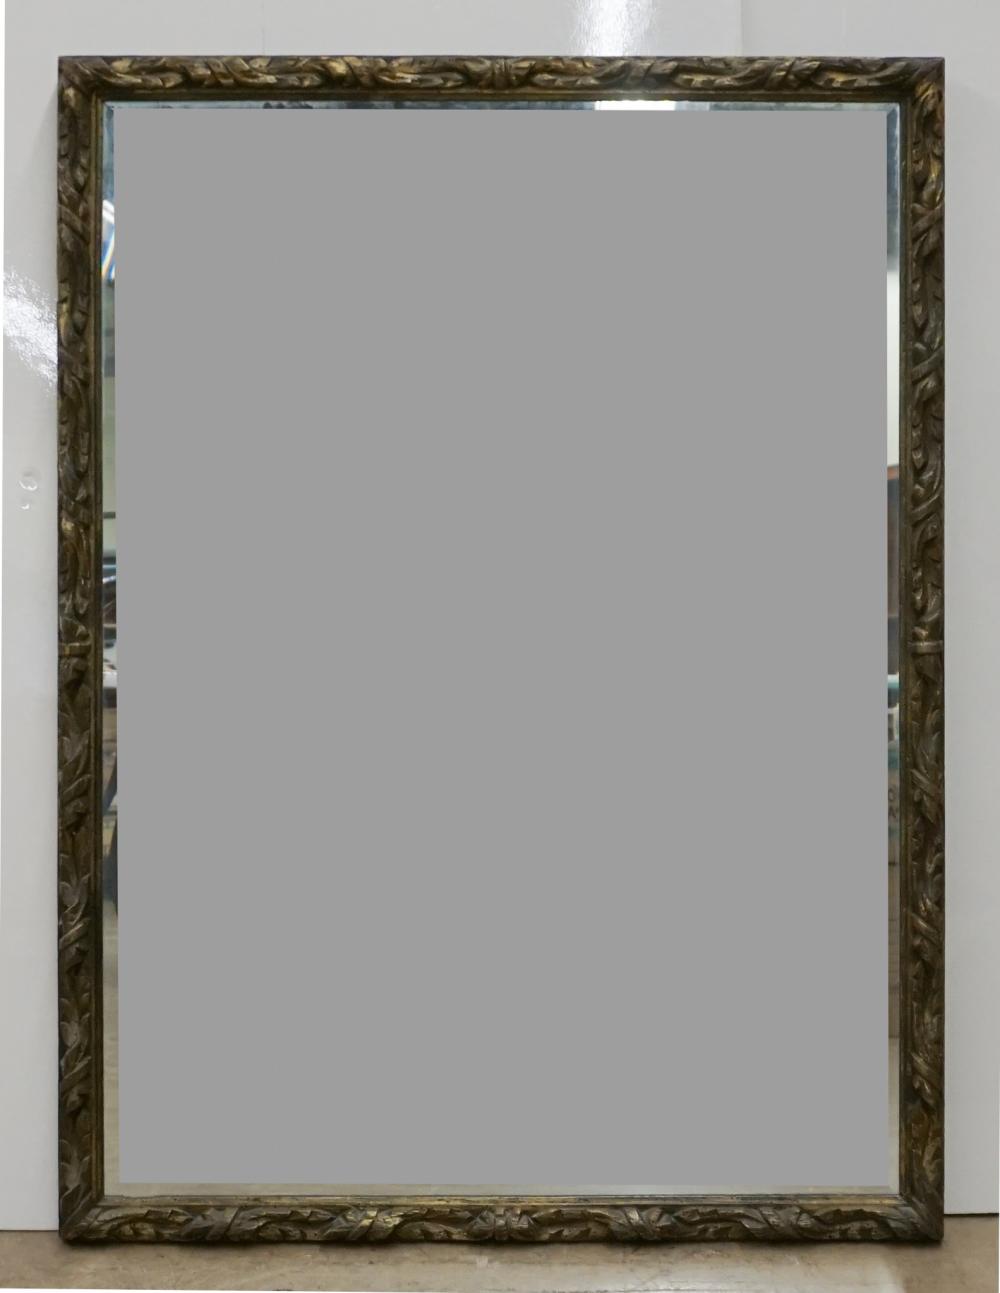 BAROQUE STYLE GOLD PAINTED WOOD 2e59d4